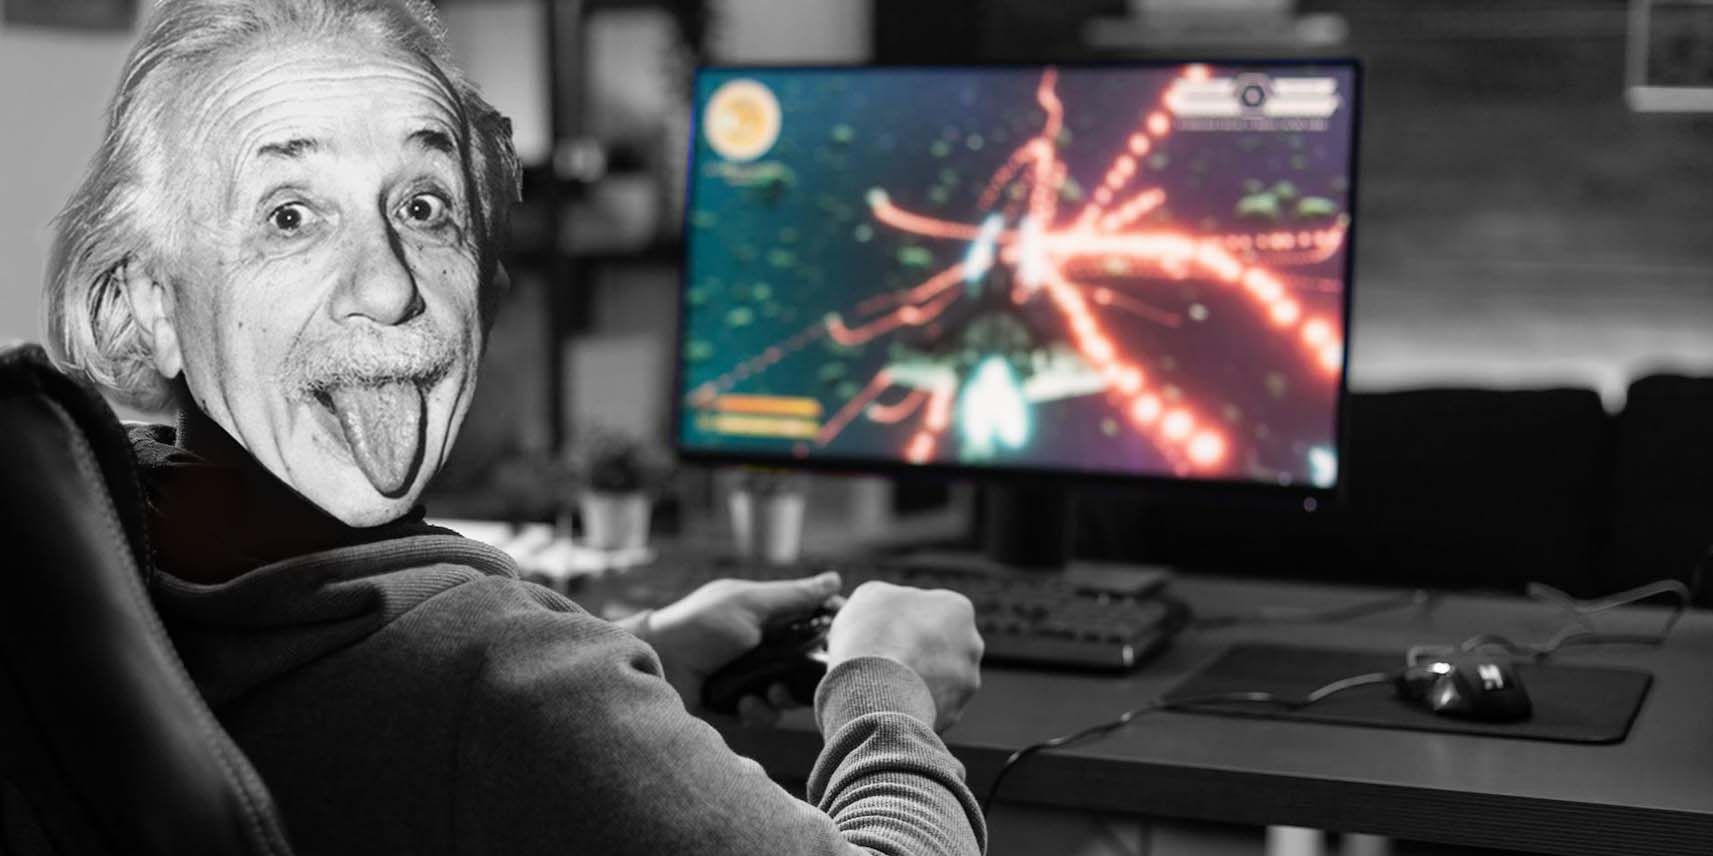 Albert Einstein makes a silly face while playing video games on a PC